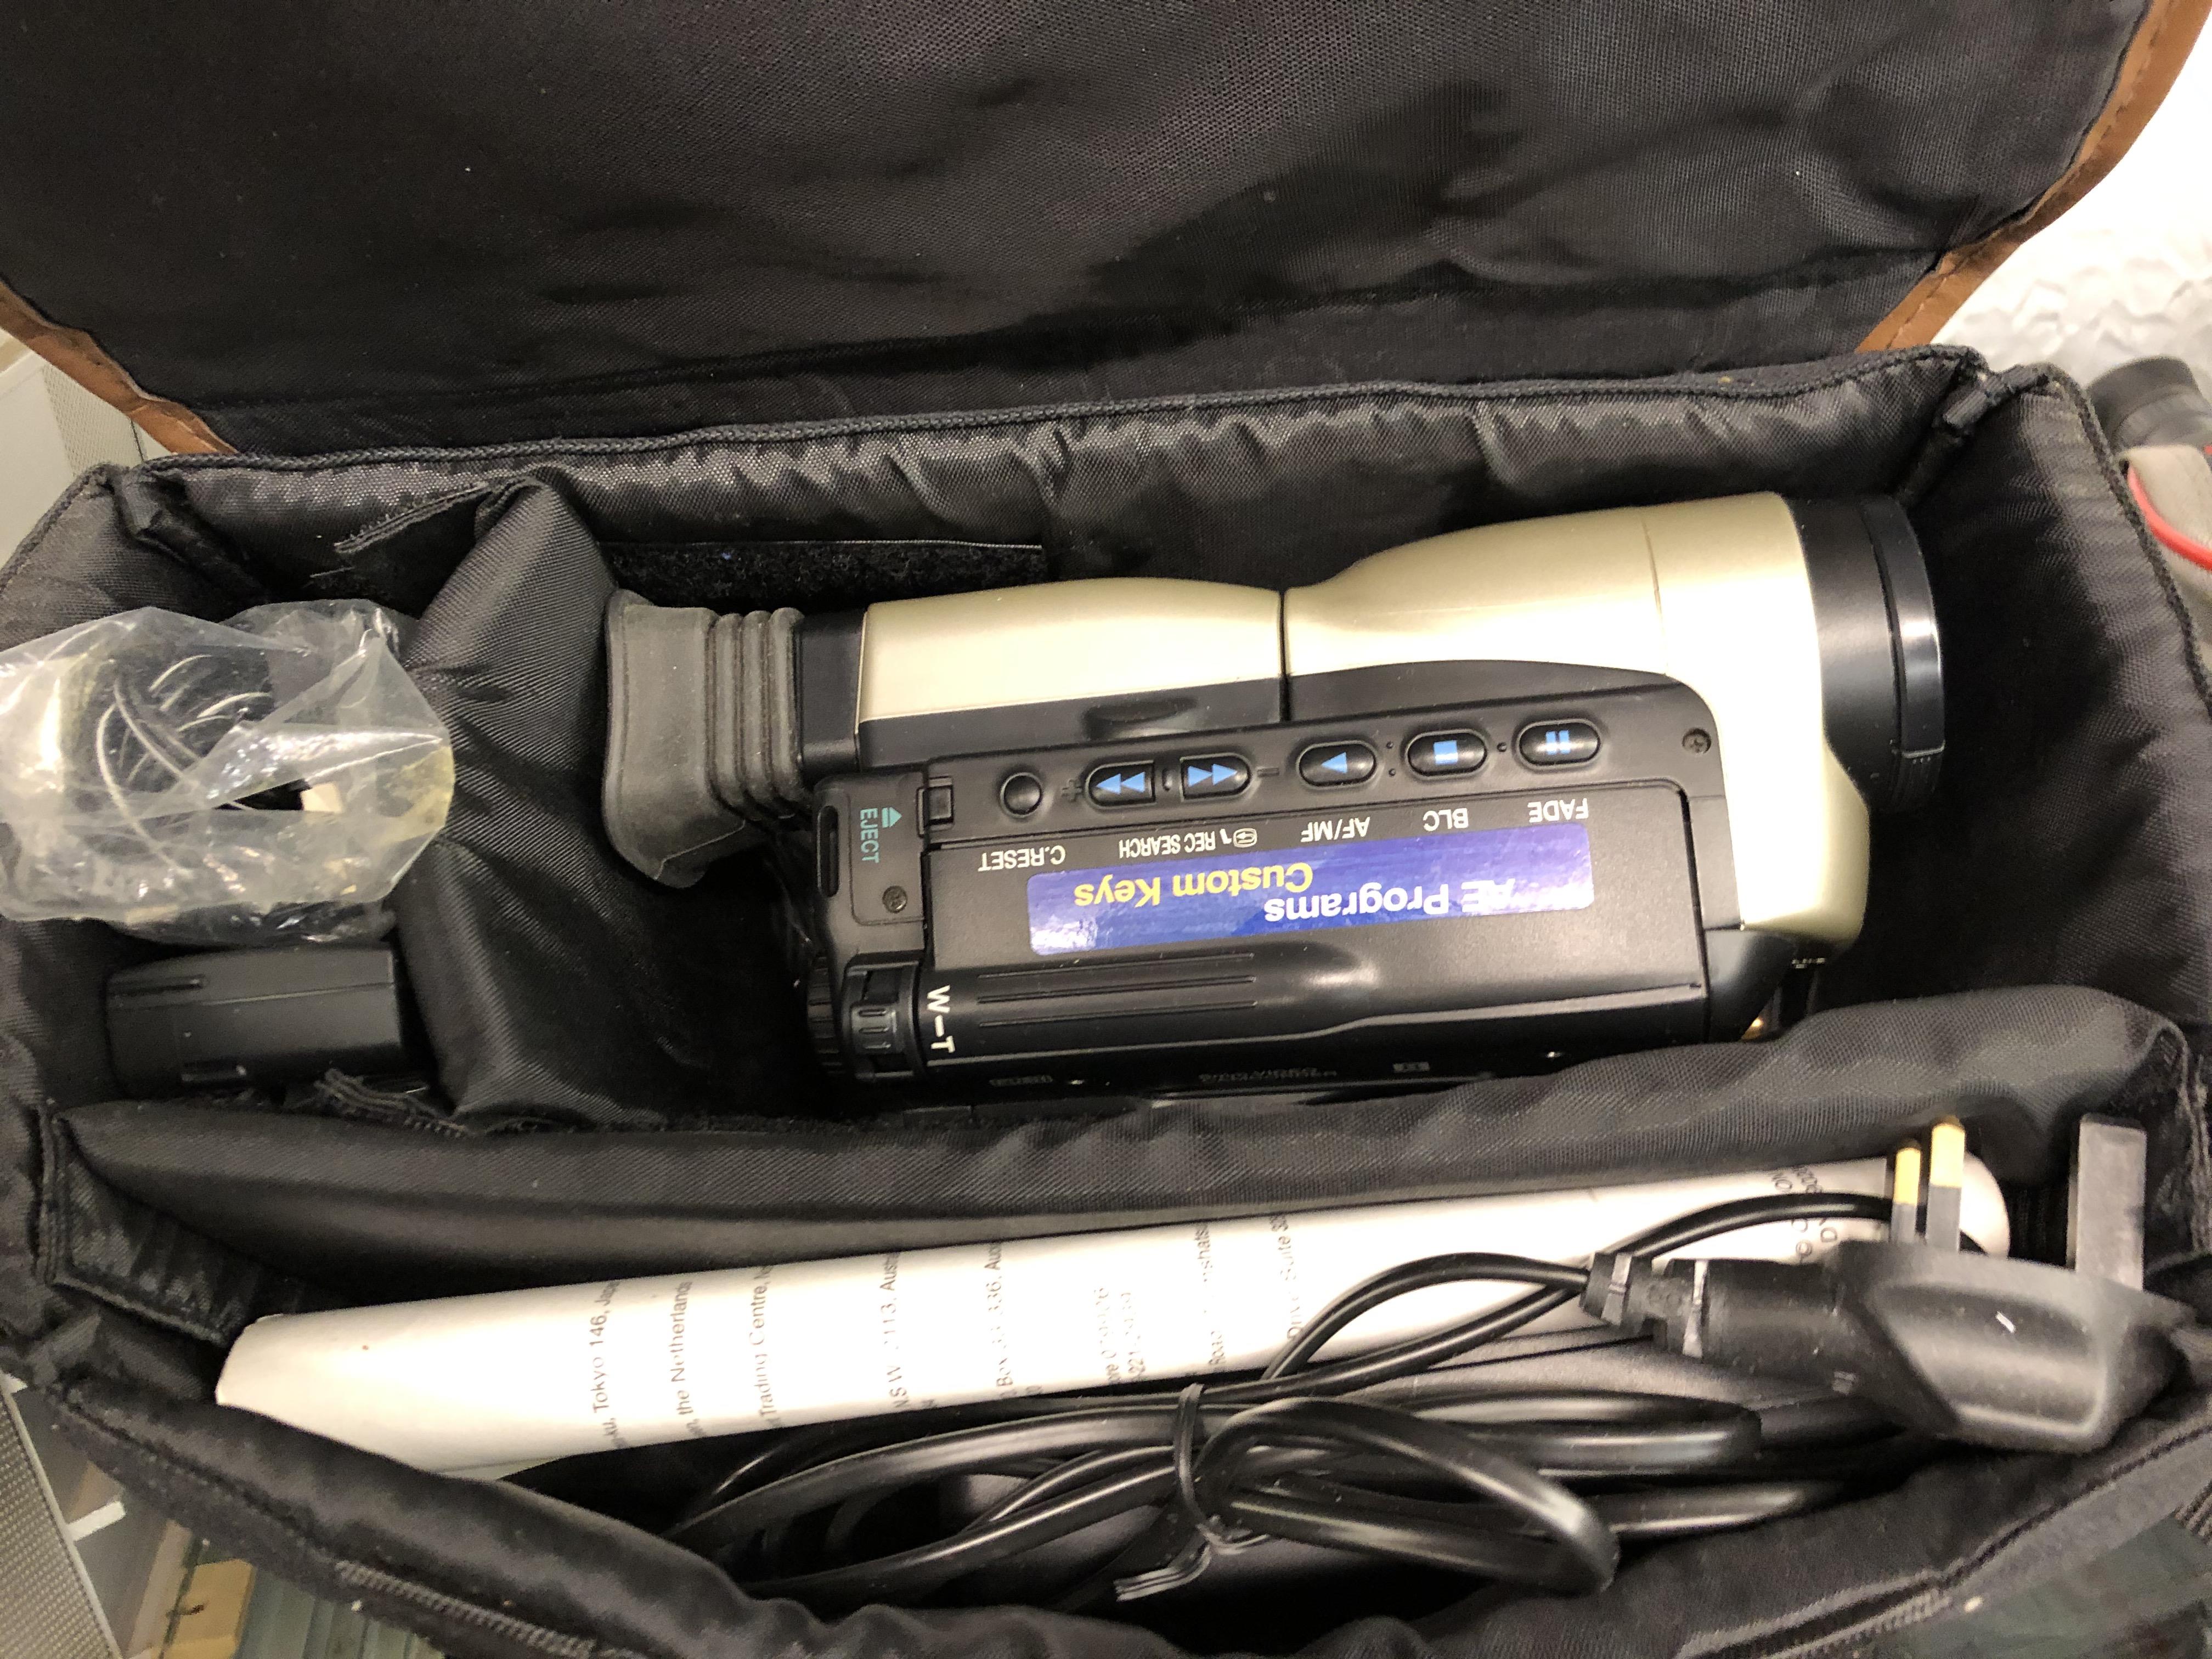 CANON 8MM VIDEO CAMCORDER IN TRAVEL BAG - Image 5 of 7